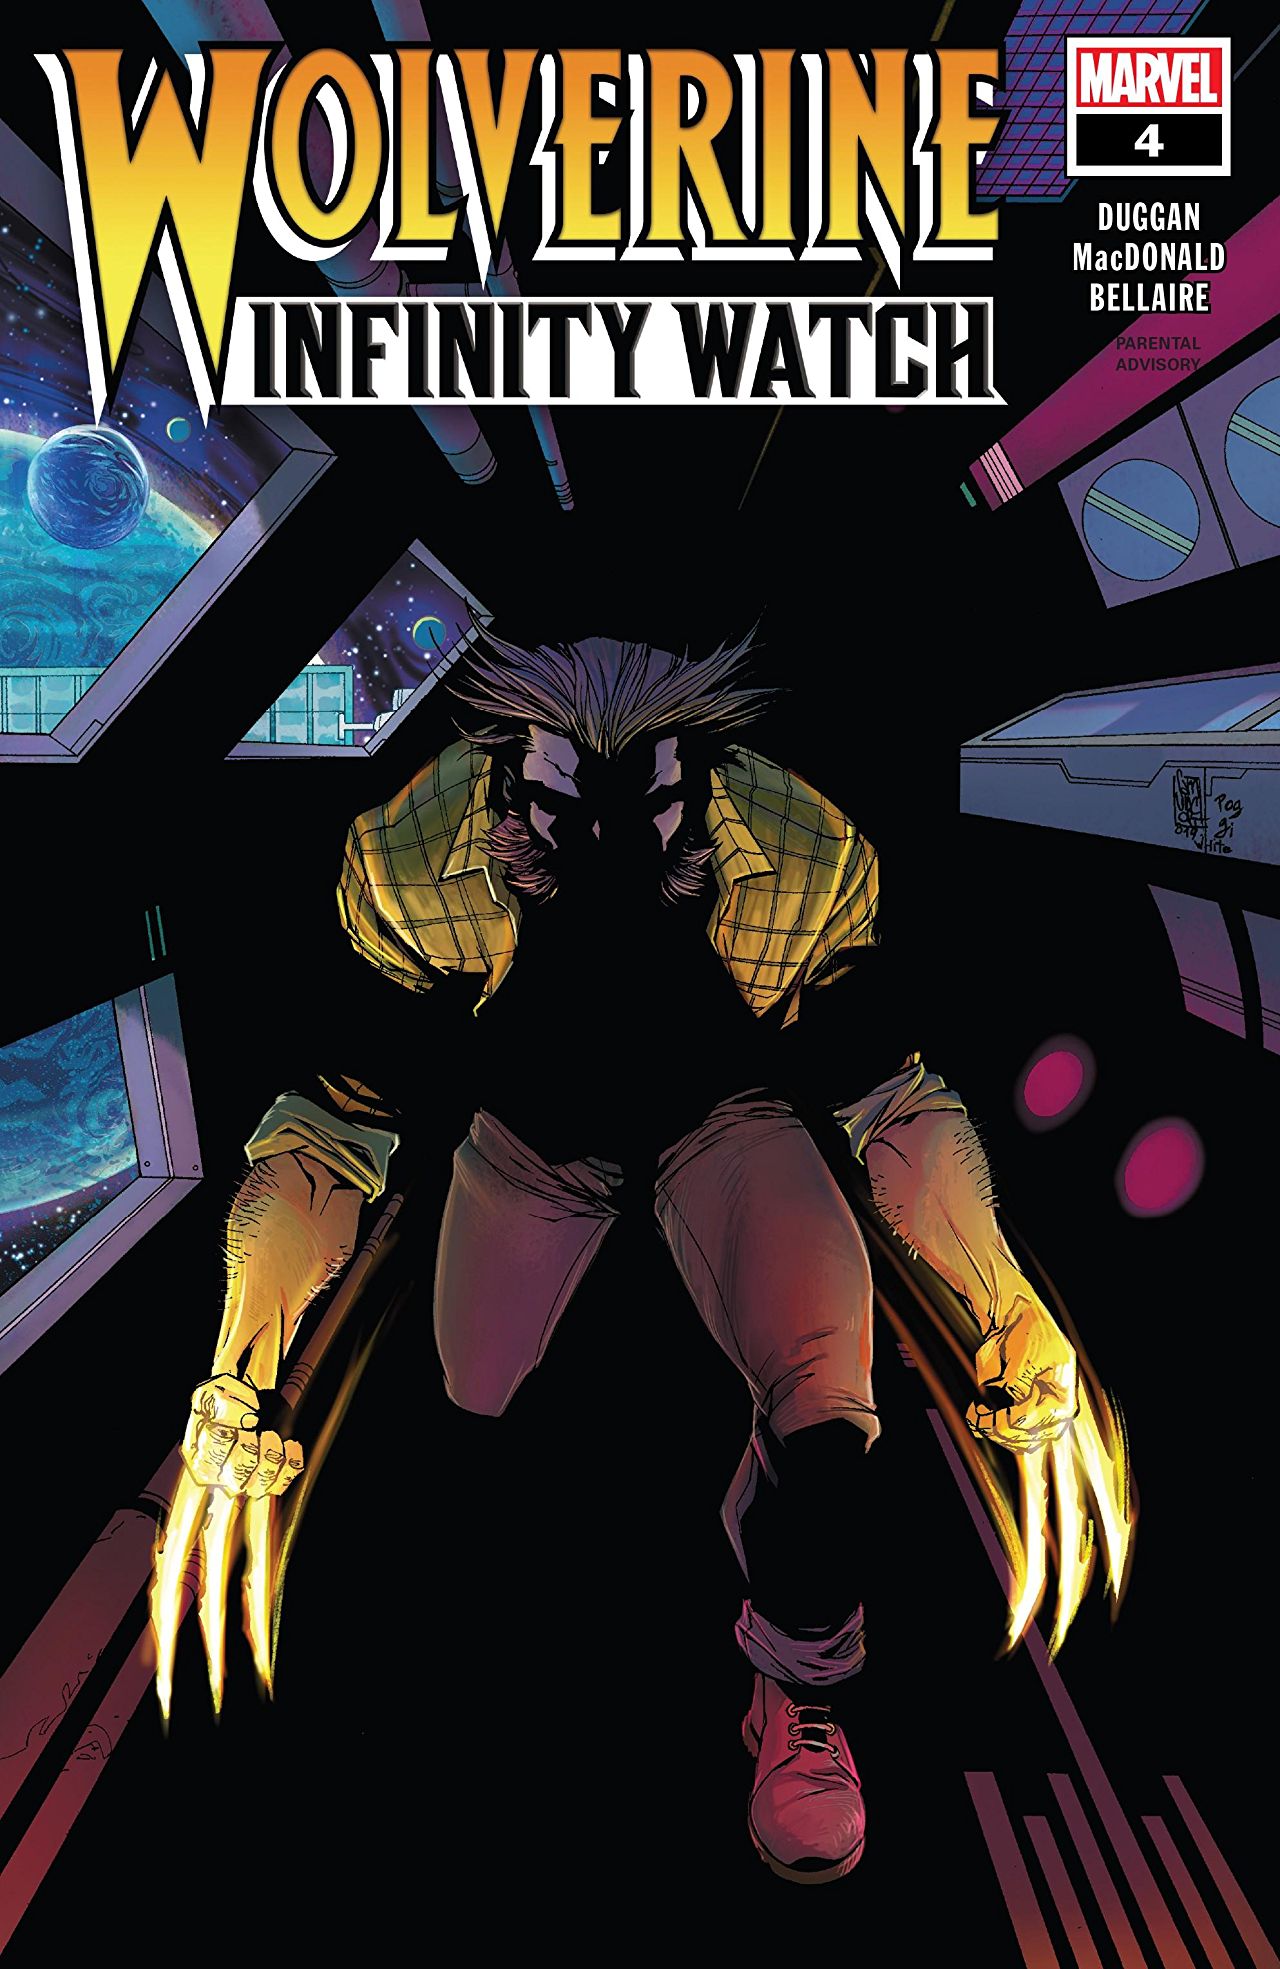 Marvel Preview: Wolverine: Infinity Watch #4